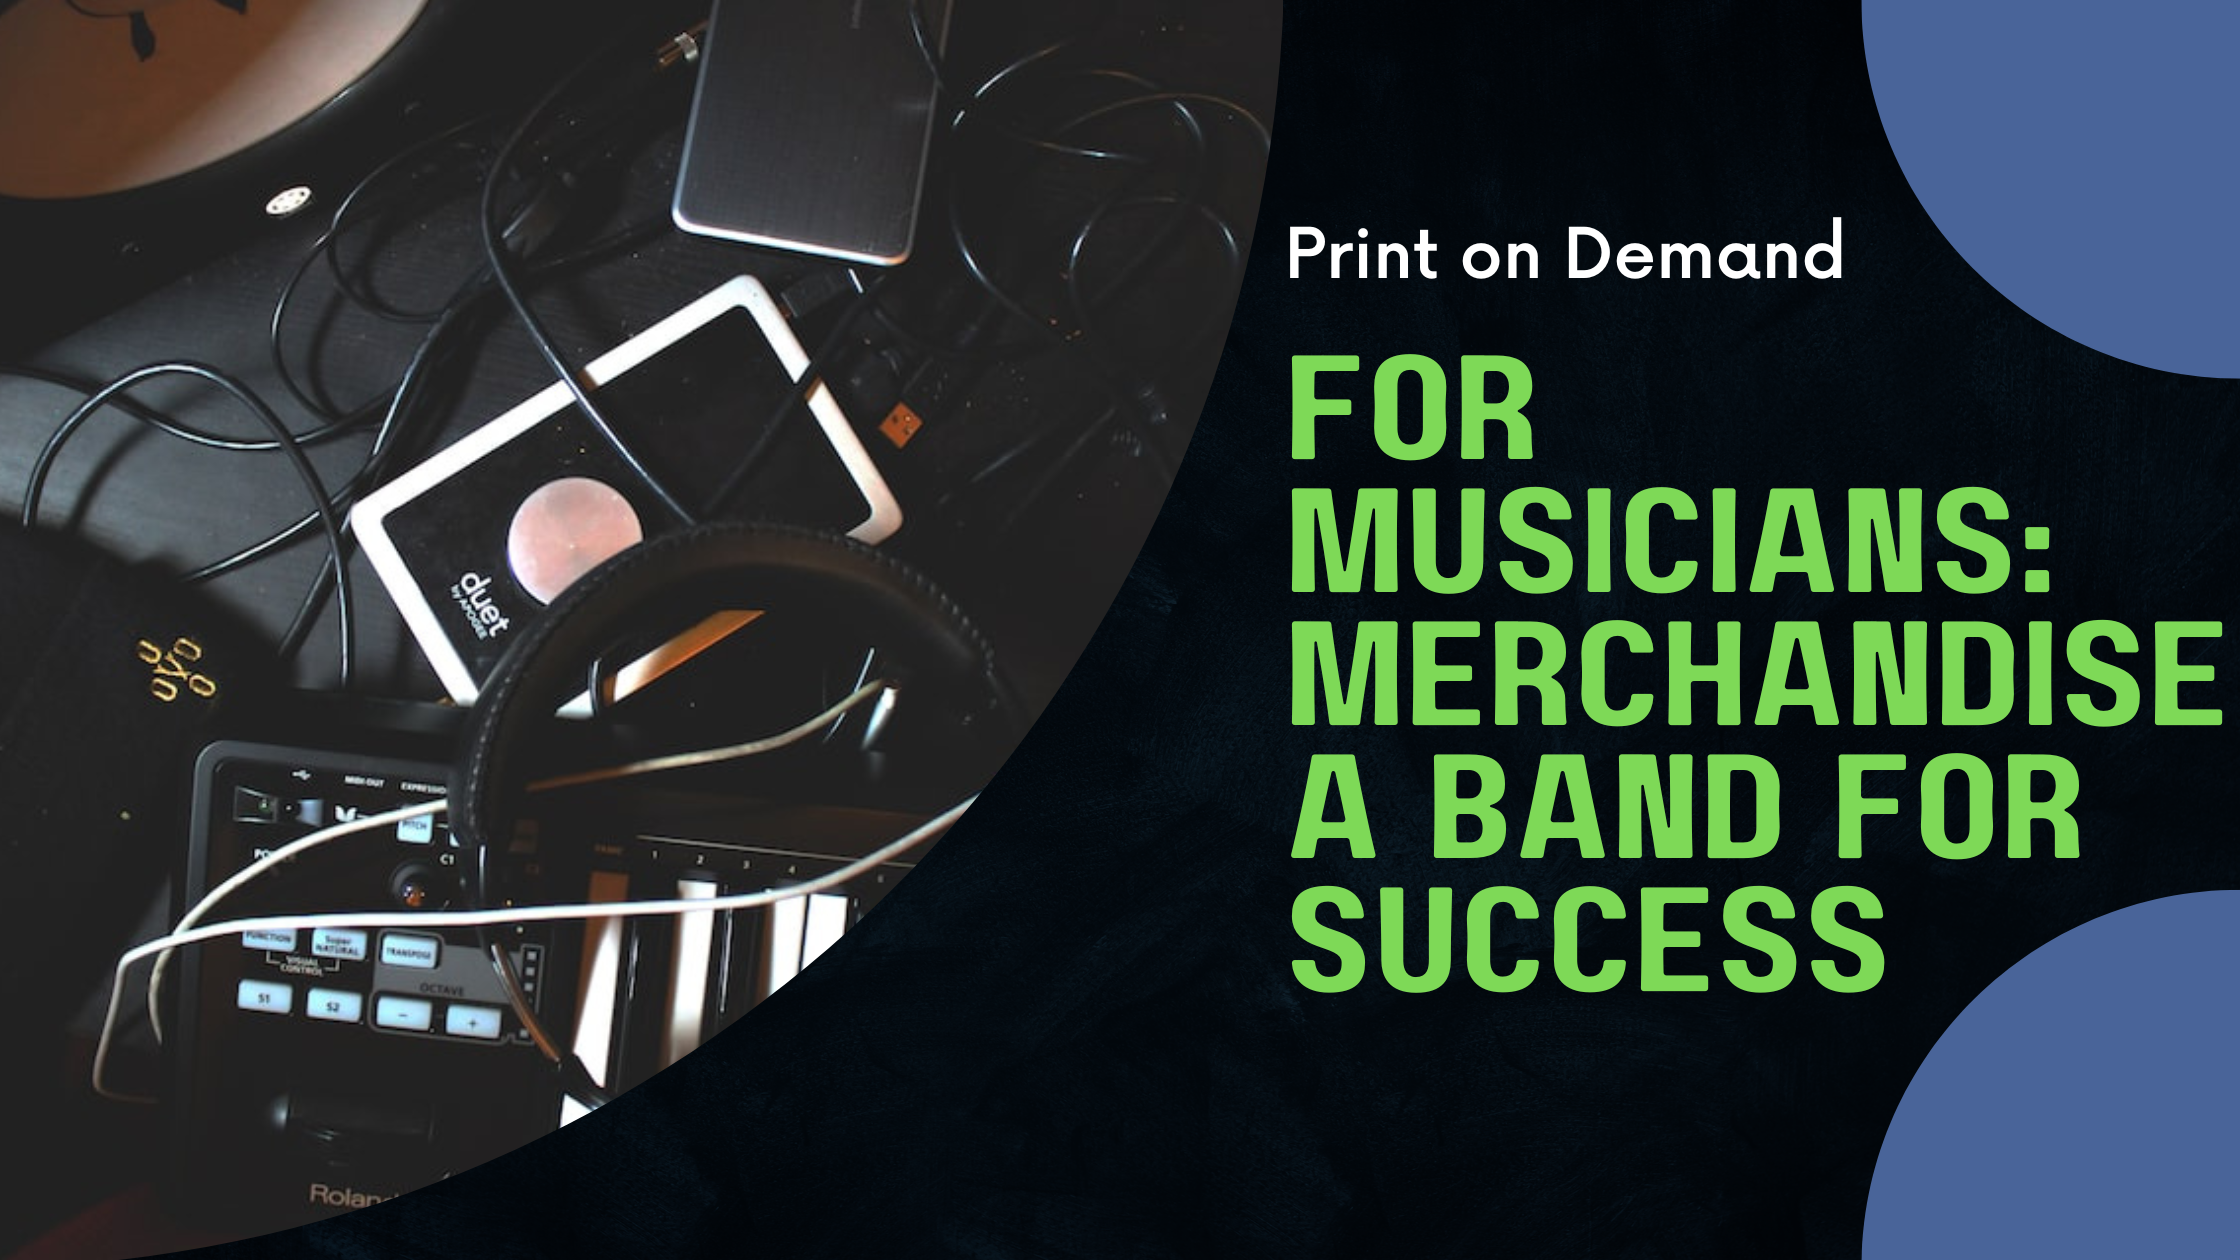 Print on Demand for Musicians: Merchandise Your Band for Success